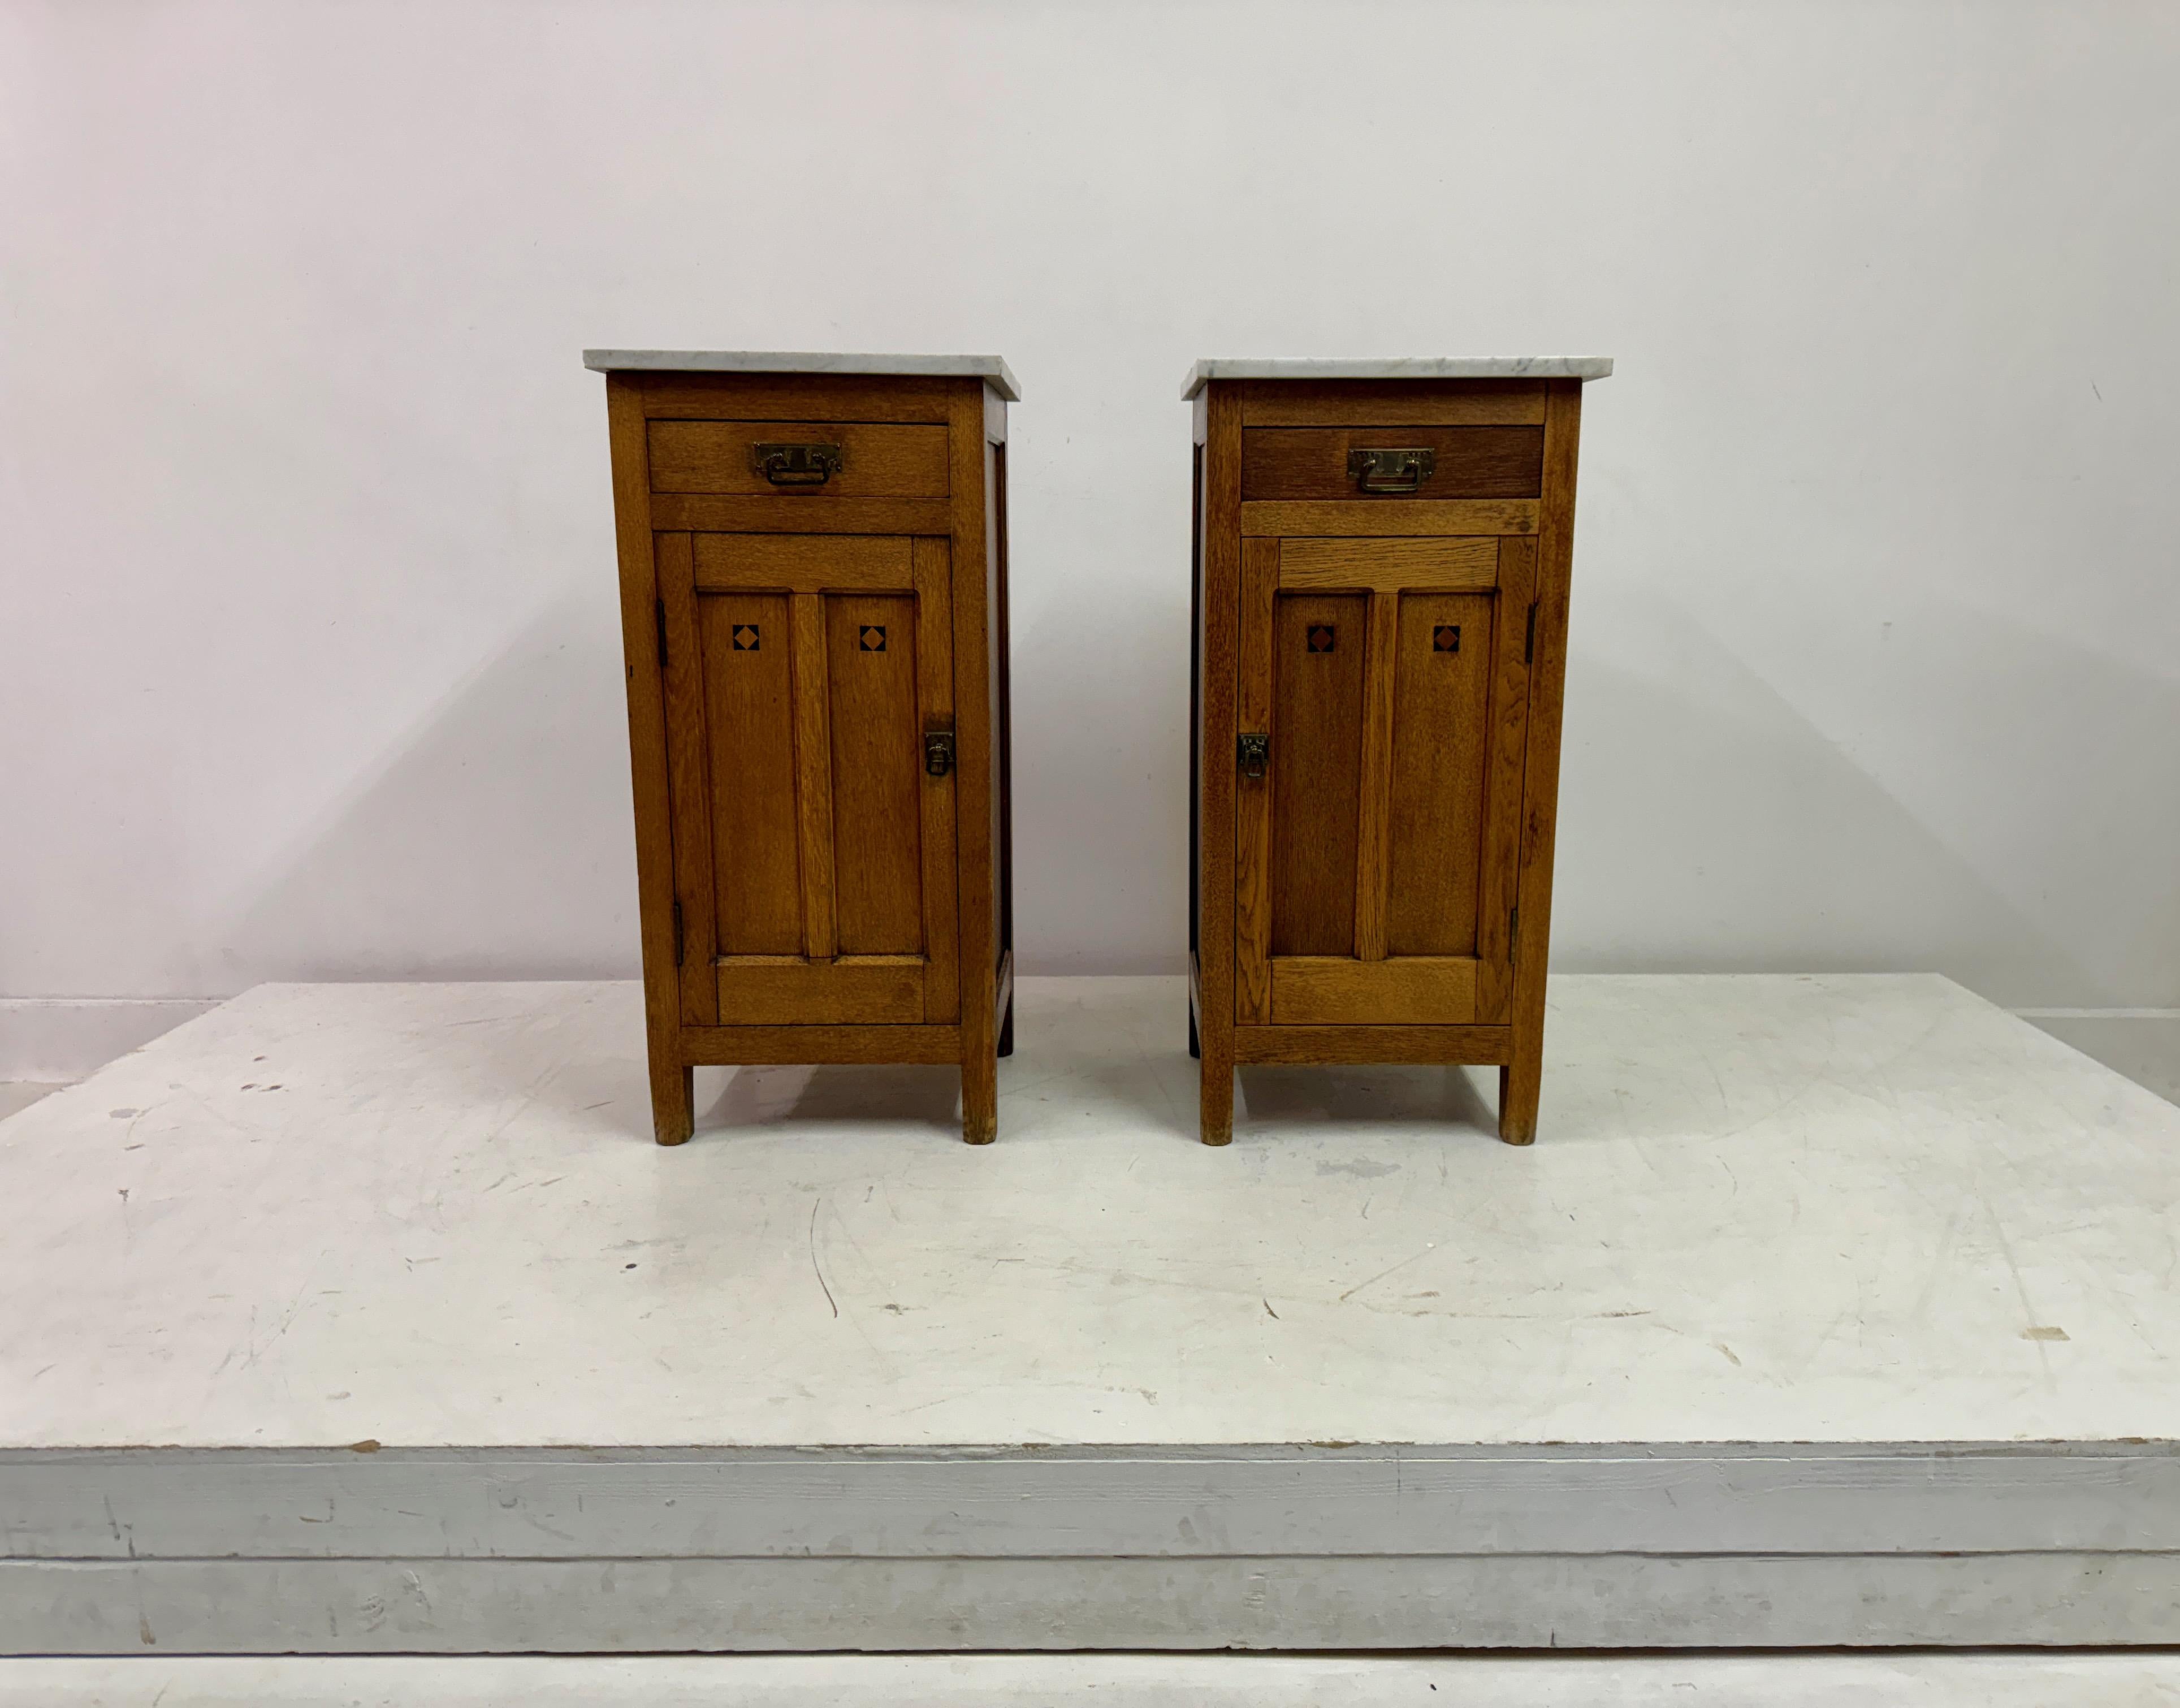 Pair of bedside cabinets

Oak

Marble tops

Brass handles

Ebony inlay detail

Early 20th Century Dutch